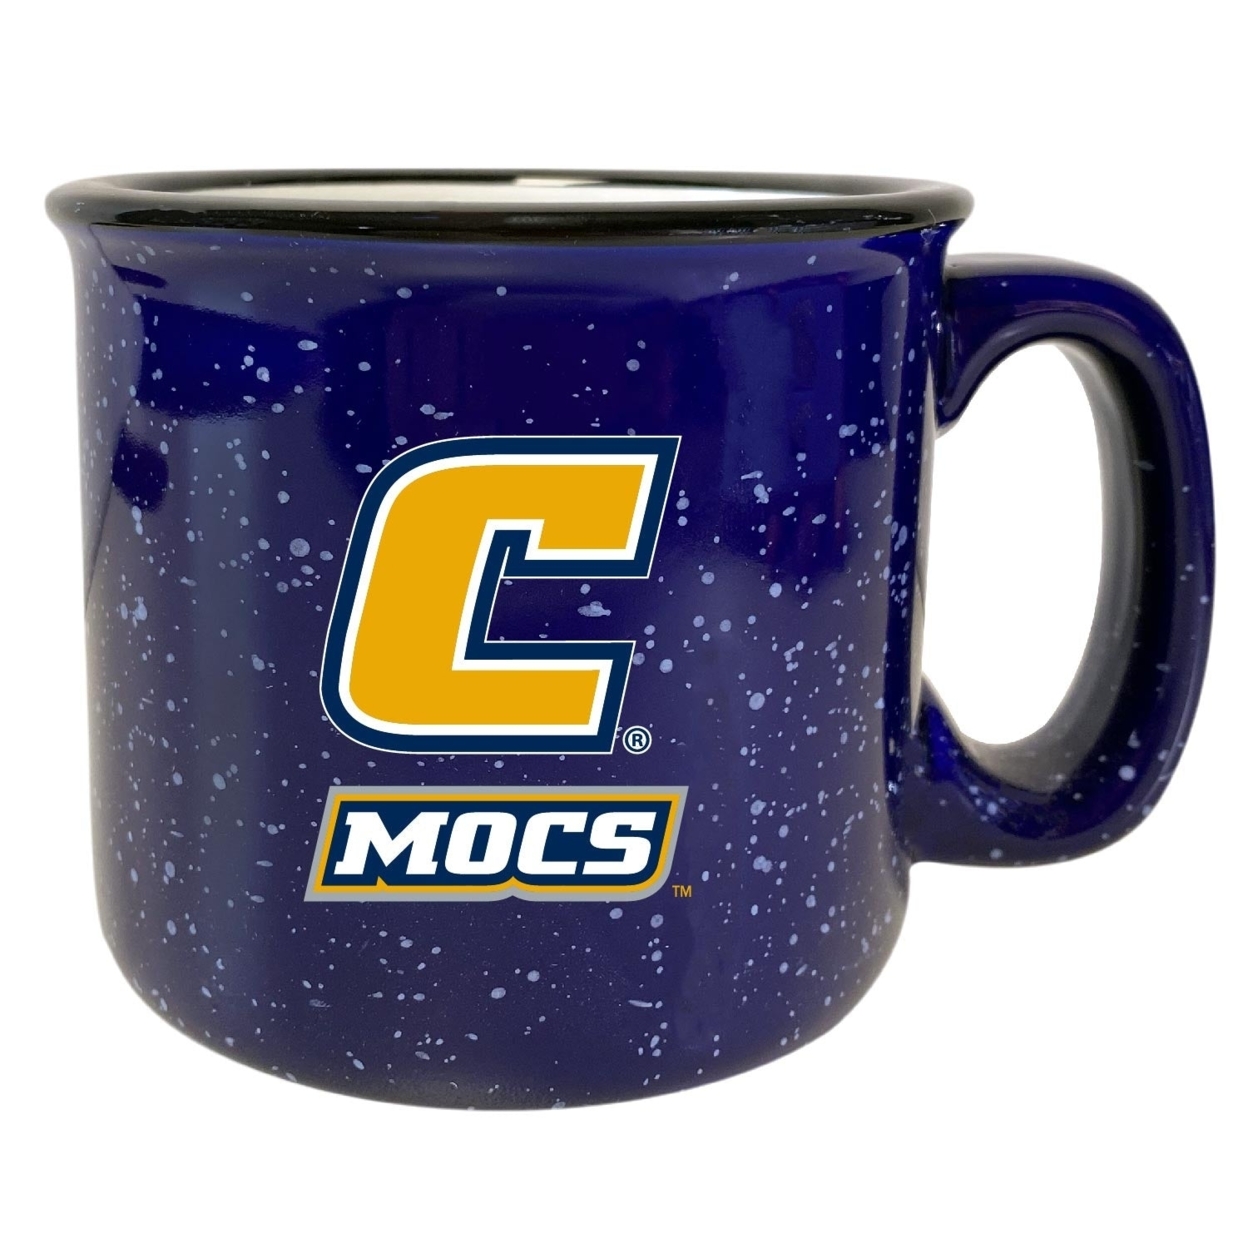 University Of Tennessee At Chattanooga Speckled Ceramic Camper Coffee Mug - Choose Your Color - Navy